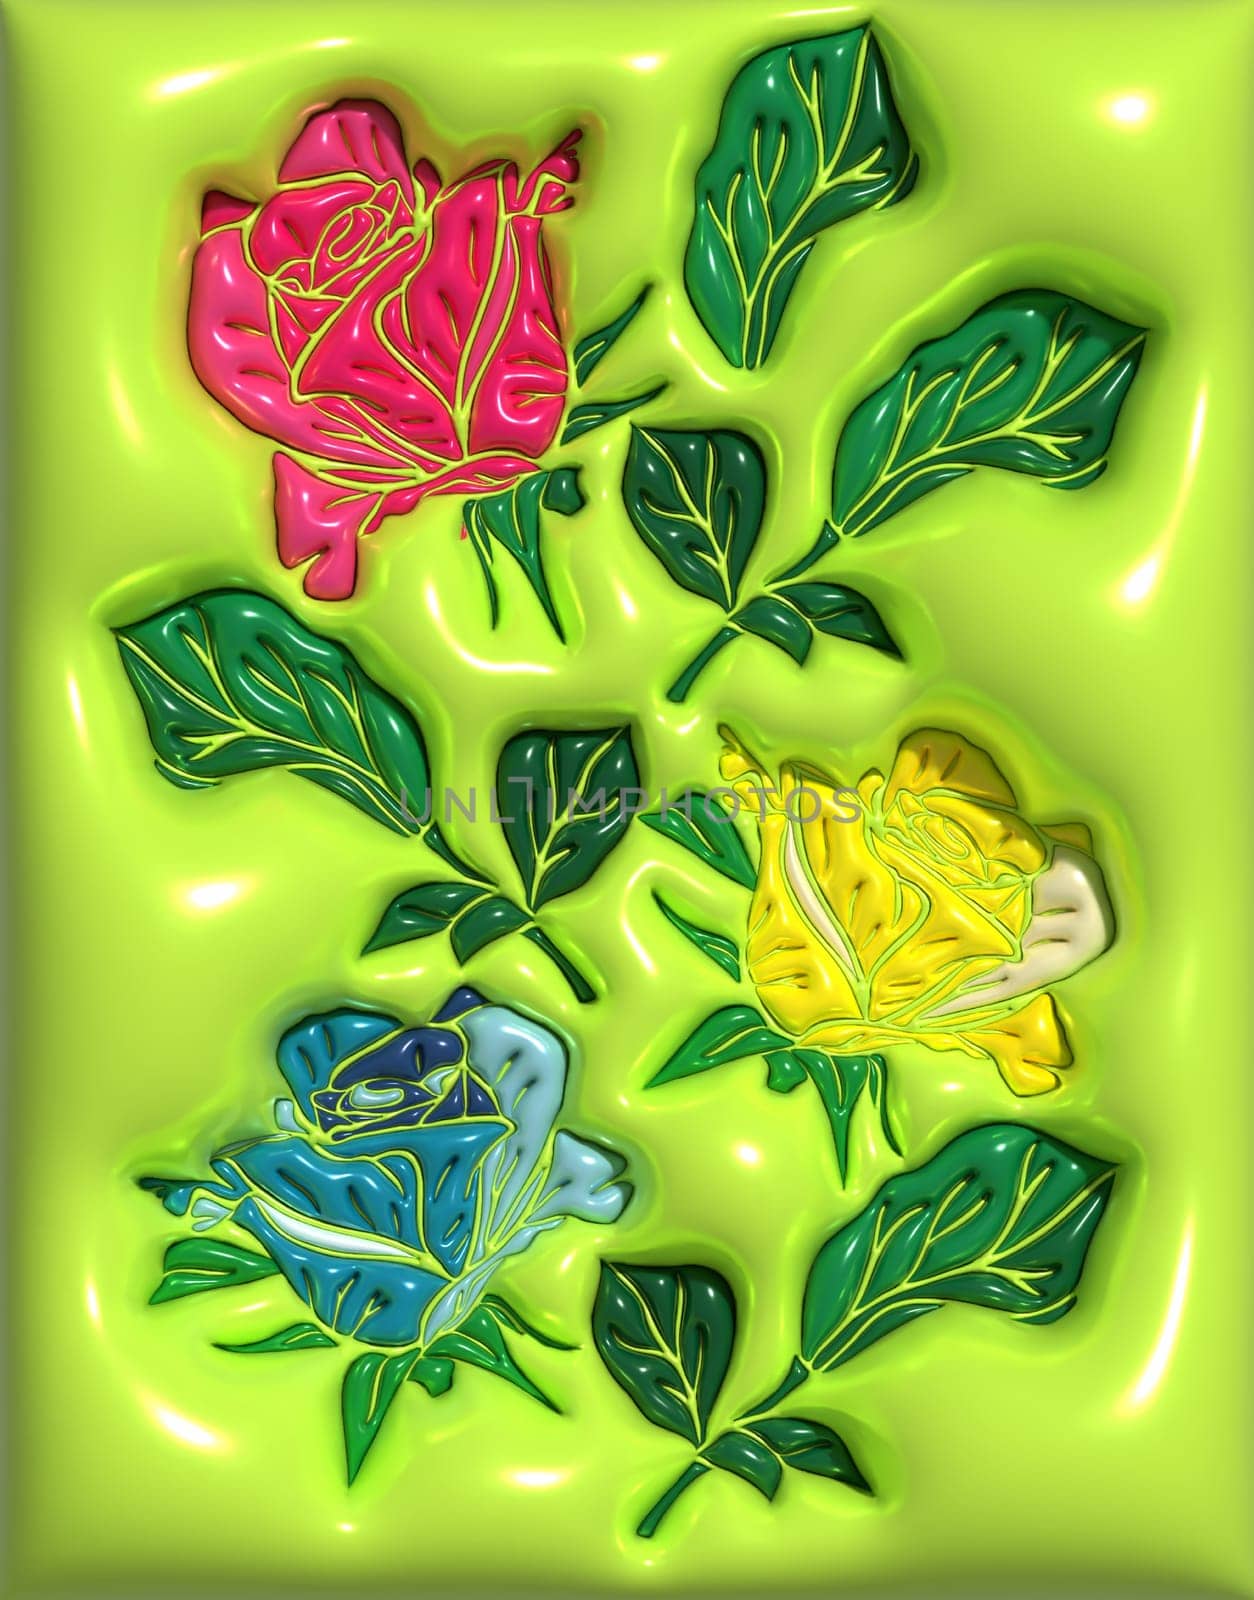 Buds of multi-colored roses on a green background, 3D rendering illustration by ndanko